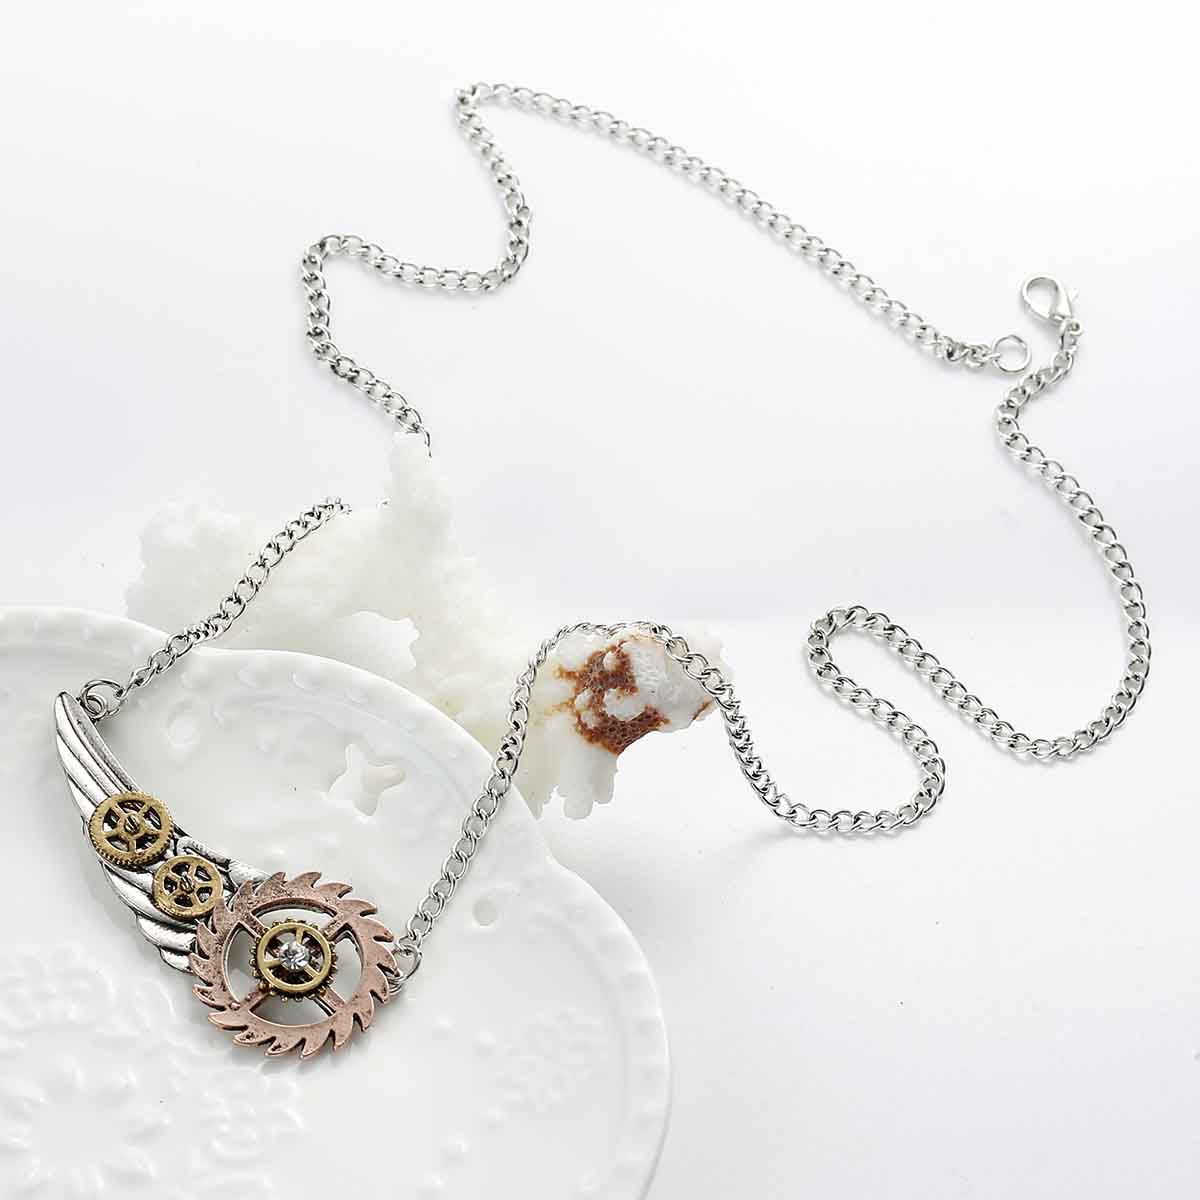 Picture of New Fashion Steampunk Necklace Link Curb Chain Antique Silver Wing Gear Pendant With Clear Rhinestone 63.5cm(25") long, 1 Piece